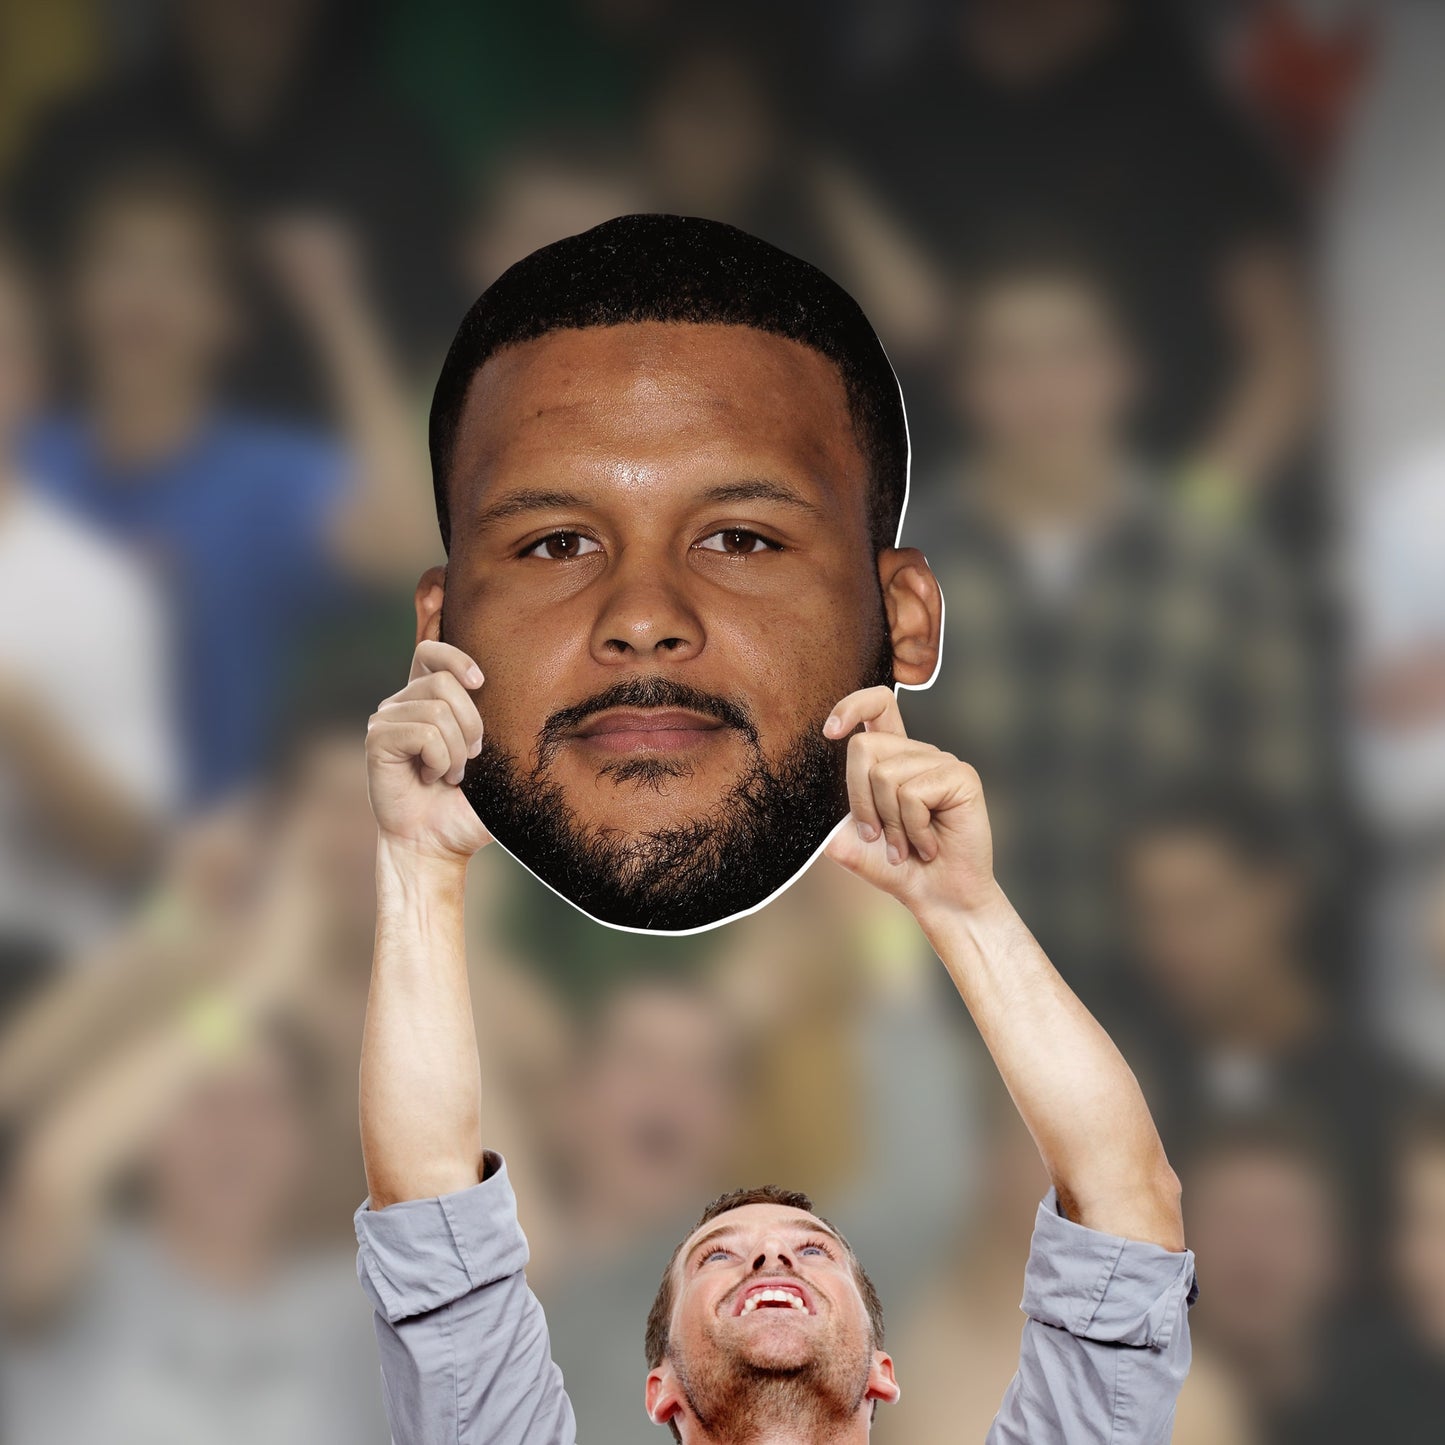 Rams fans know and love Aaron Donald as the star defensive tackle from their favorite team and now they can bring home that Los Angeles pride with an Aaron Donald Big Head Foam Core Cutout! This Big Head is bold and sturdy and is sure to stand out in a crowd, even at SoFi Stadium! 19" x 24" Big Head Cutout